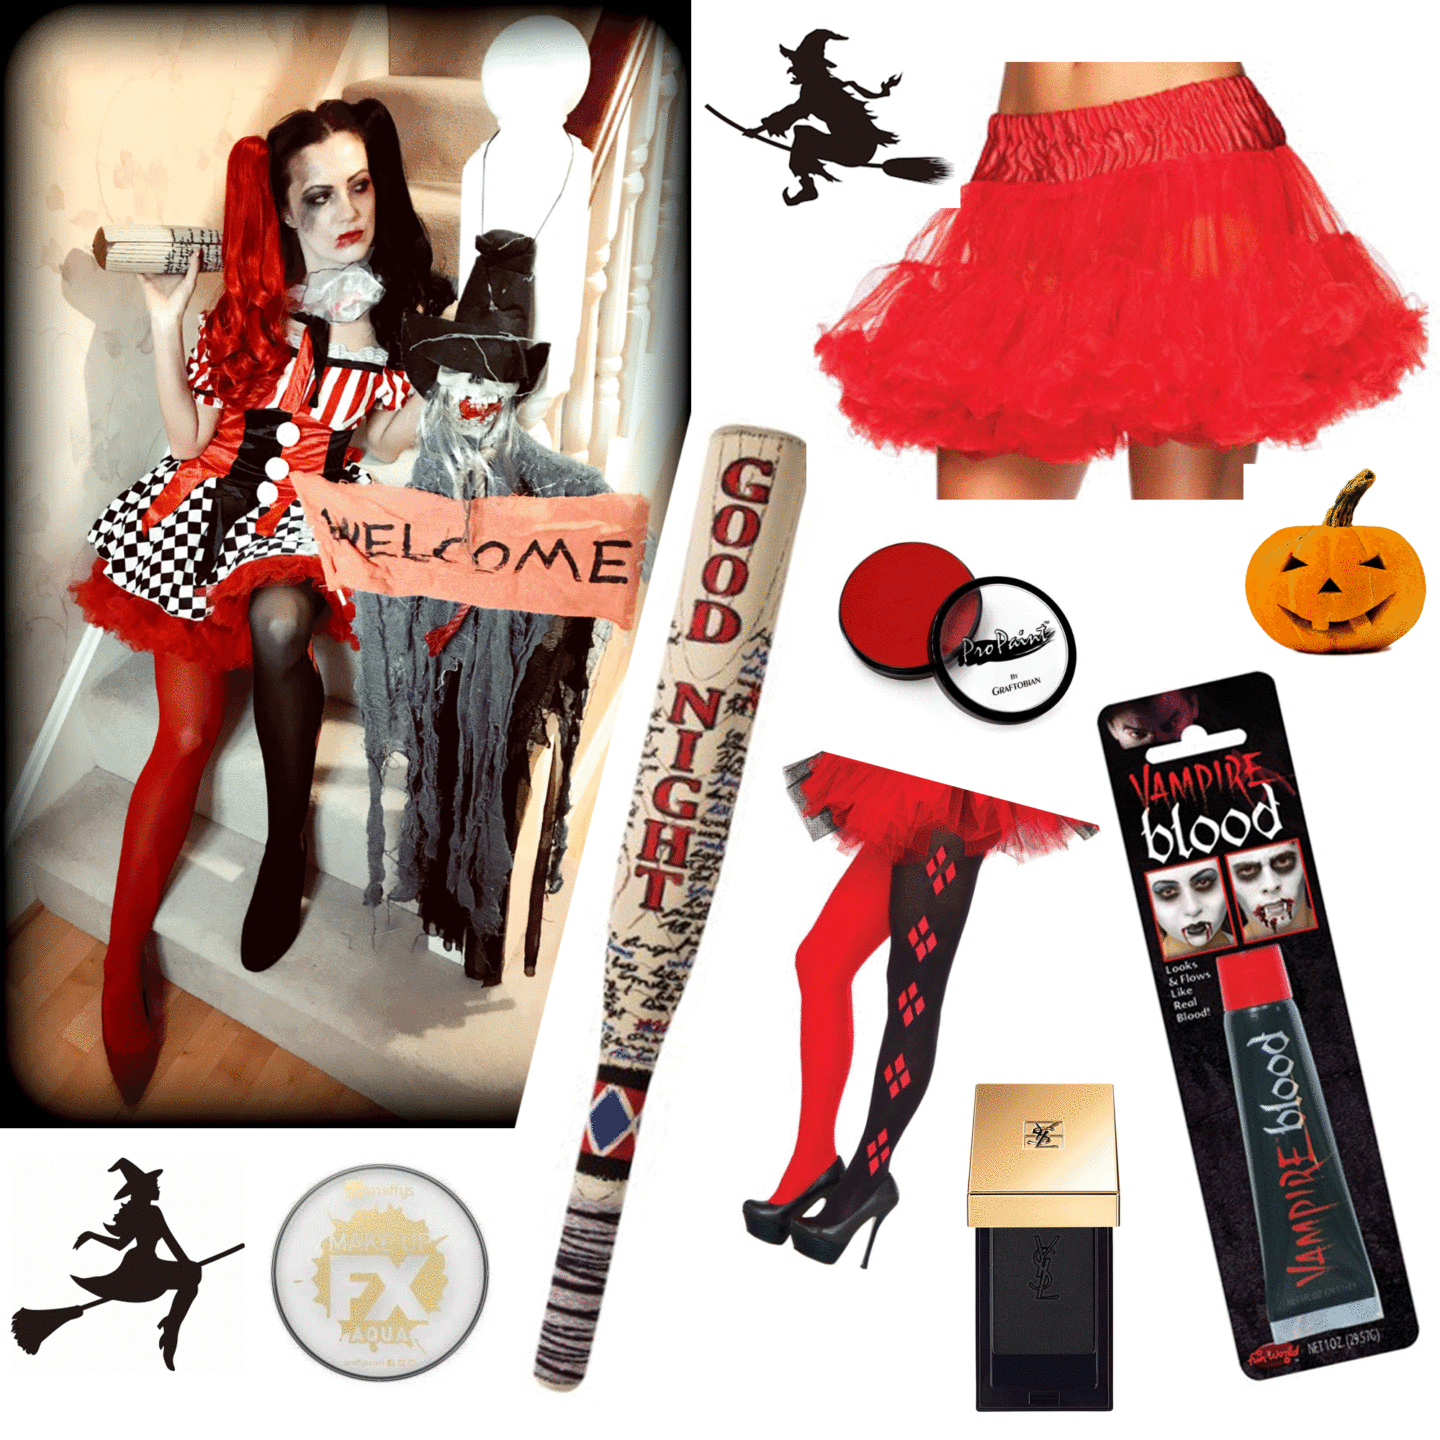 HALLOWEEN HARLEQUIN CLOWN COSTUME | Yves Saint Laurent Couture Mono Eyeshadow, 10 Khol | RED TULLE PETTICOAT | DC WOMEN'S HARLEY QUINN TIGHTS | THEATRICAL BLOOD | Harley Quinn Inflatable Bat | DELUXE RED MAKEUP | Snazaroo White Face Paint